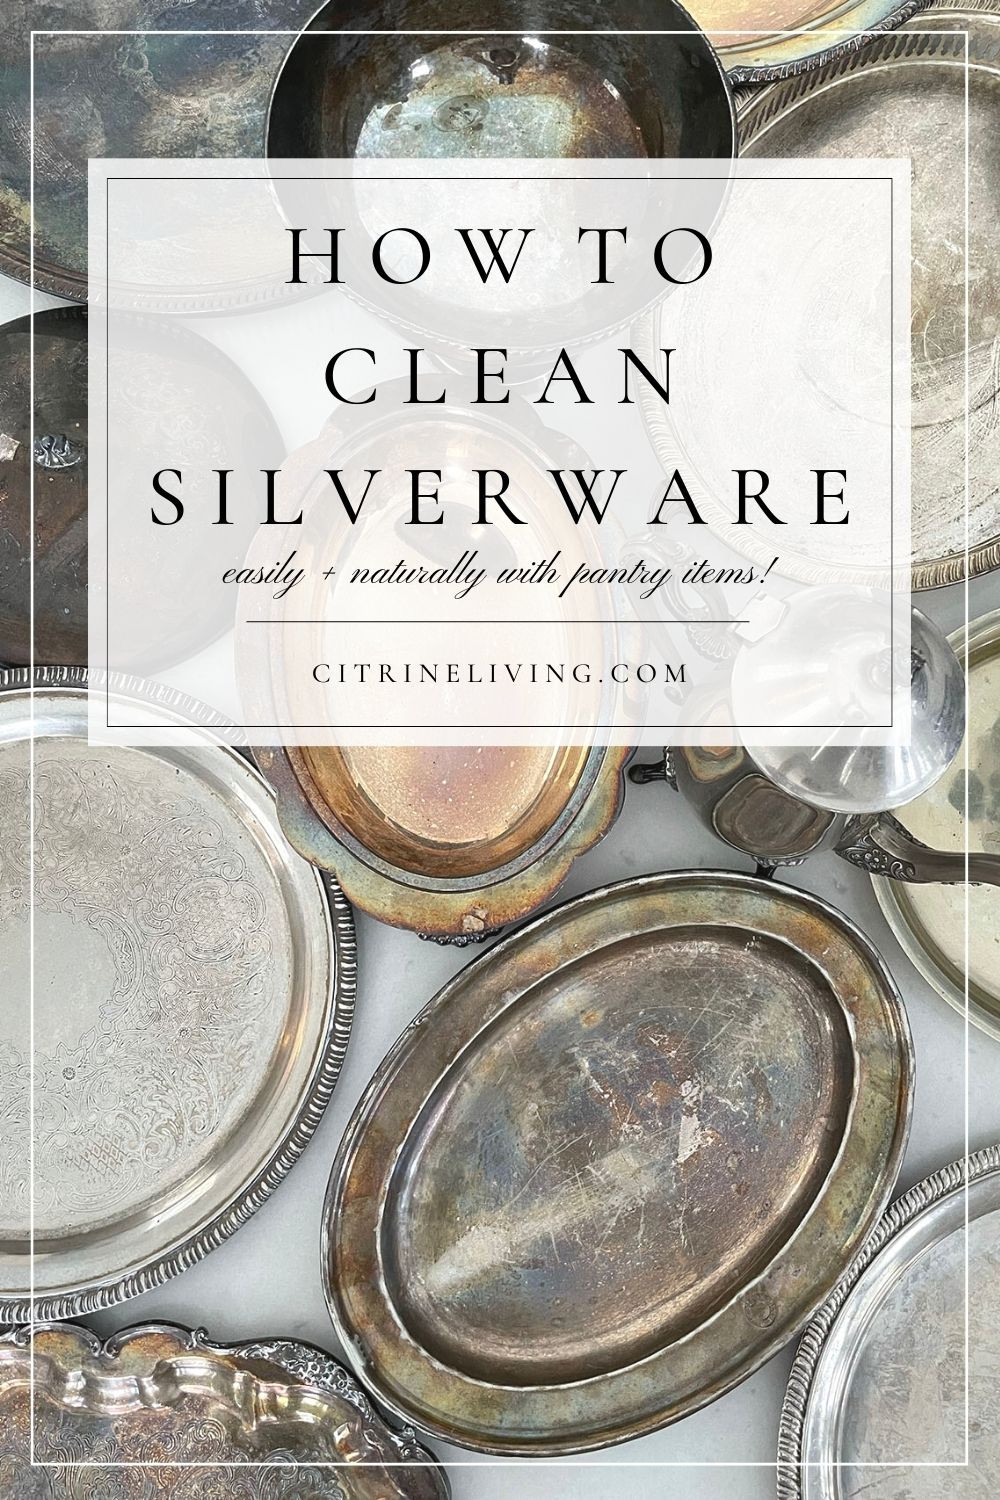 HOW TO CLEAN SILVERWARE EASILY